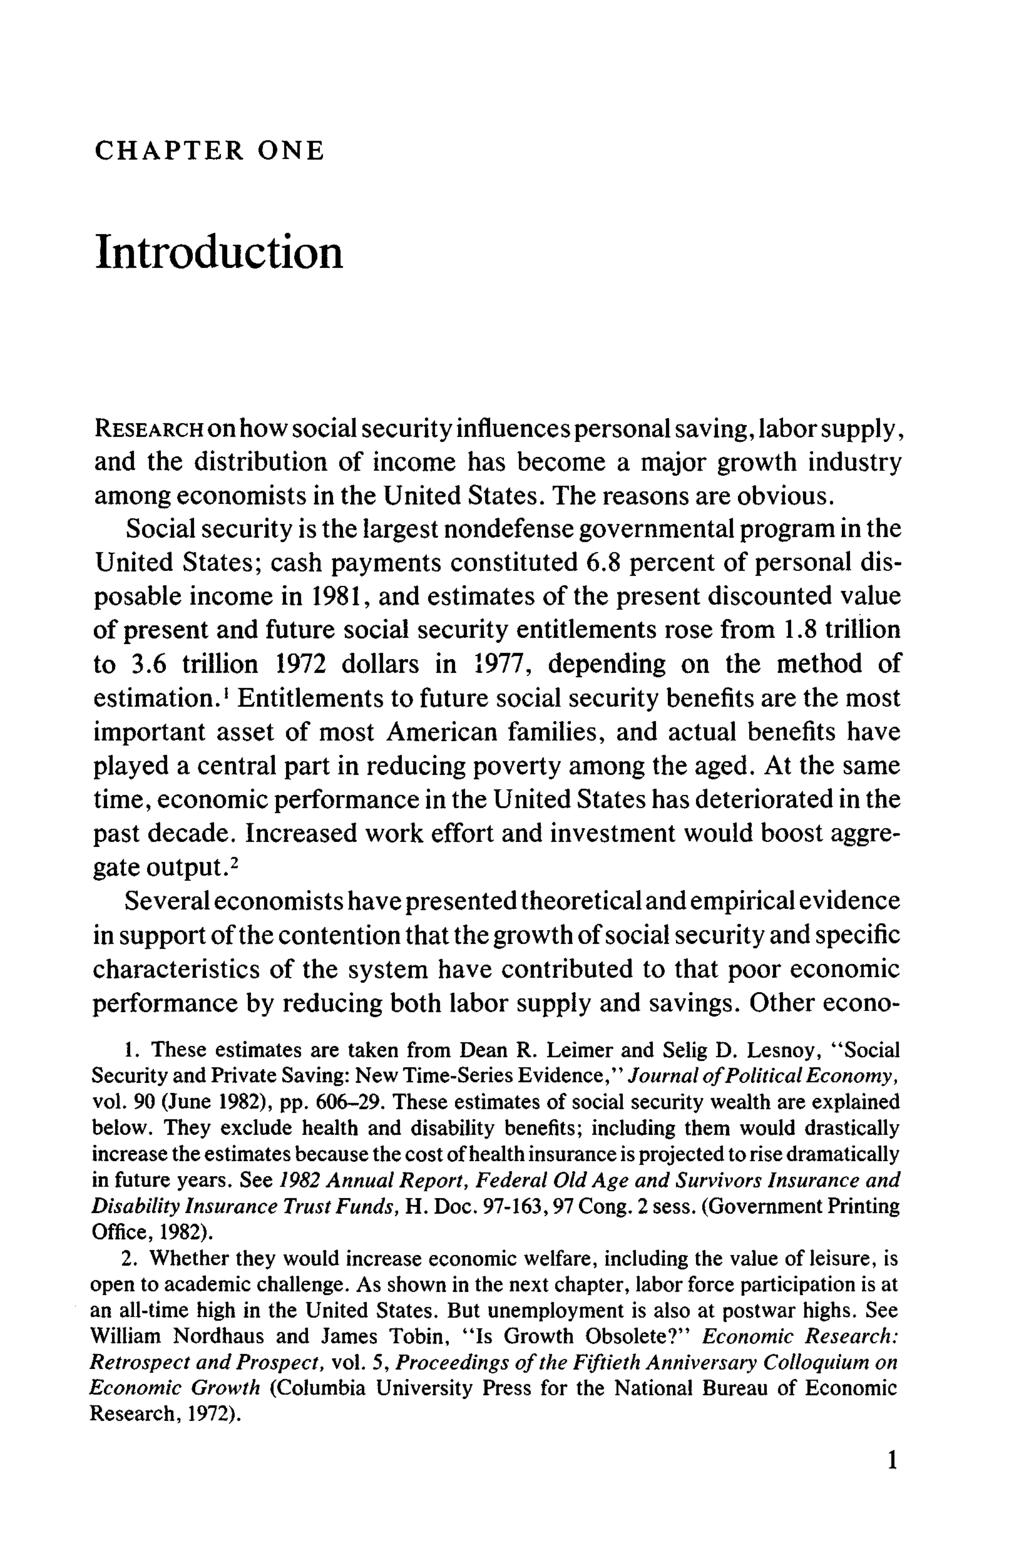 CHAPTER ONE Introduction RESEARCH on how social security influences personal saving, labor supply, and the distribution of income has become a major growth industry among economists in the United